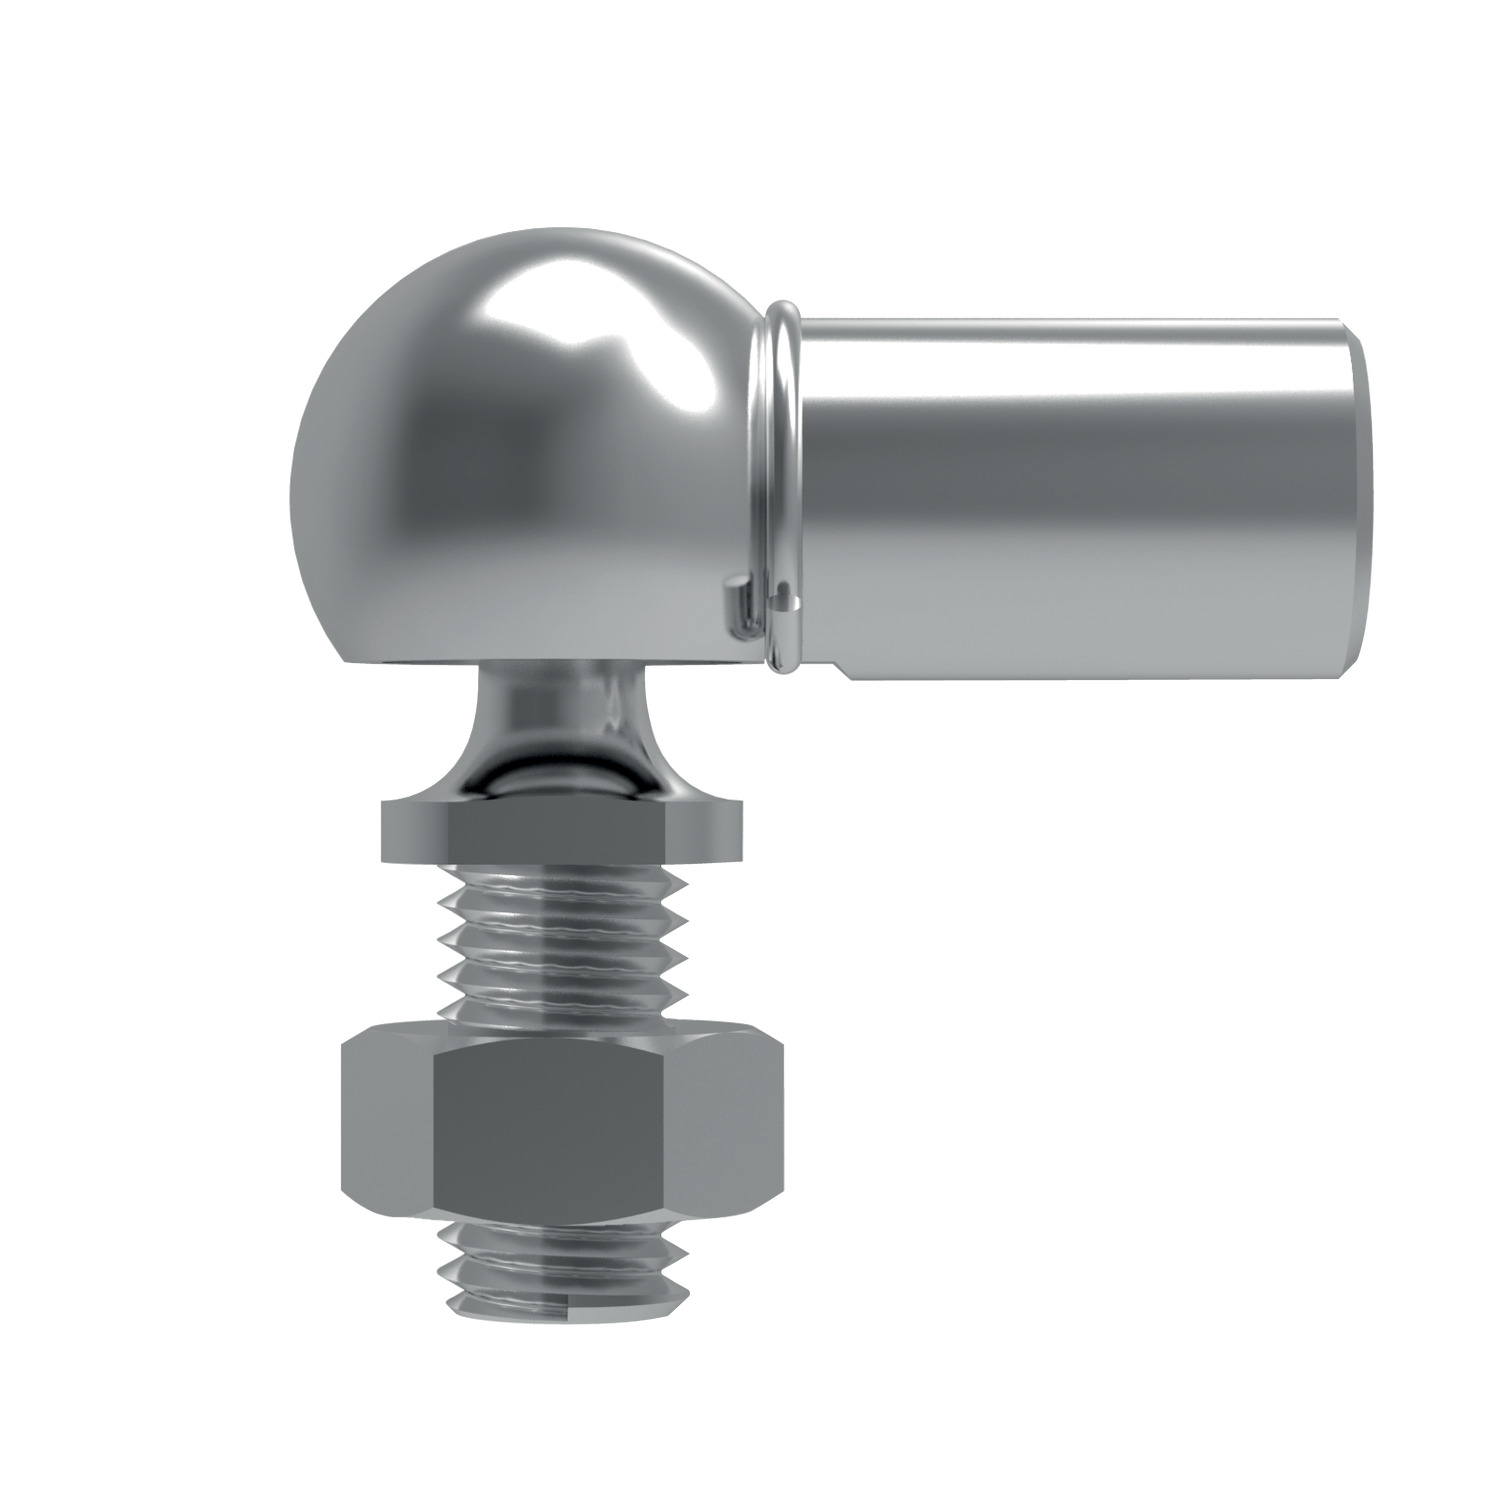 65506.W0005 Stainless Ball and Socket Joints - SS. Left - 8 - M 5 - 22